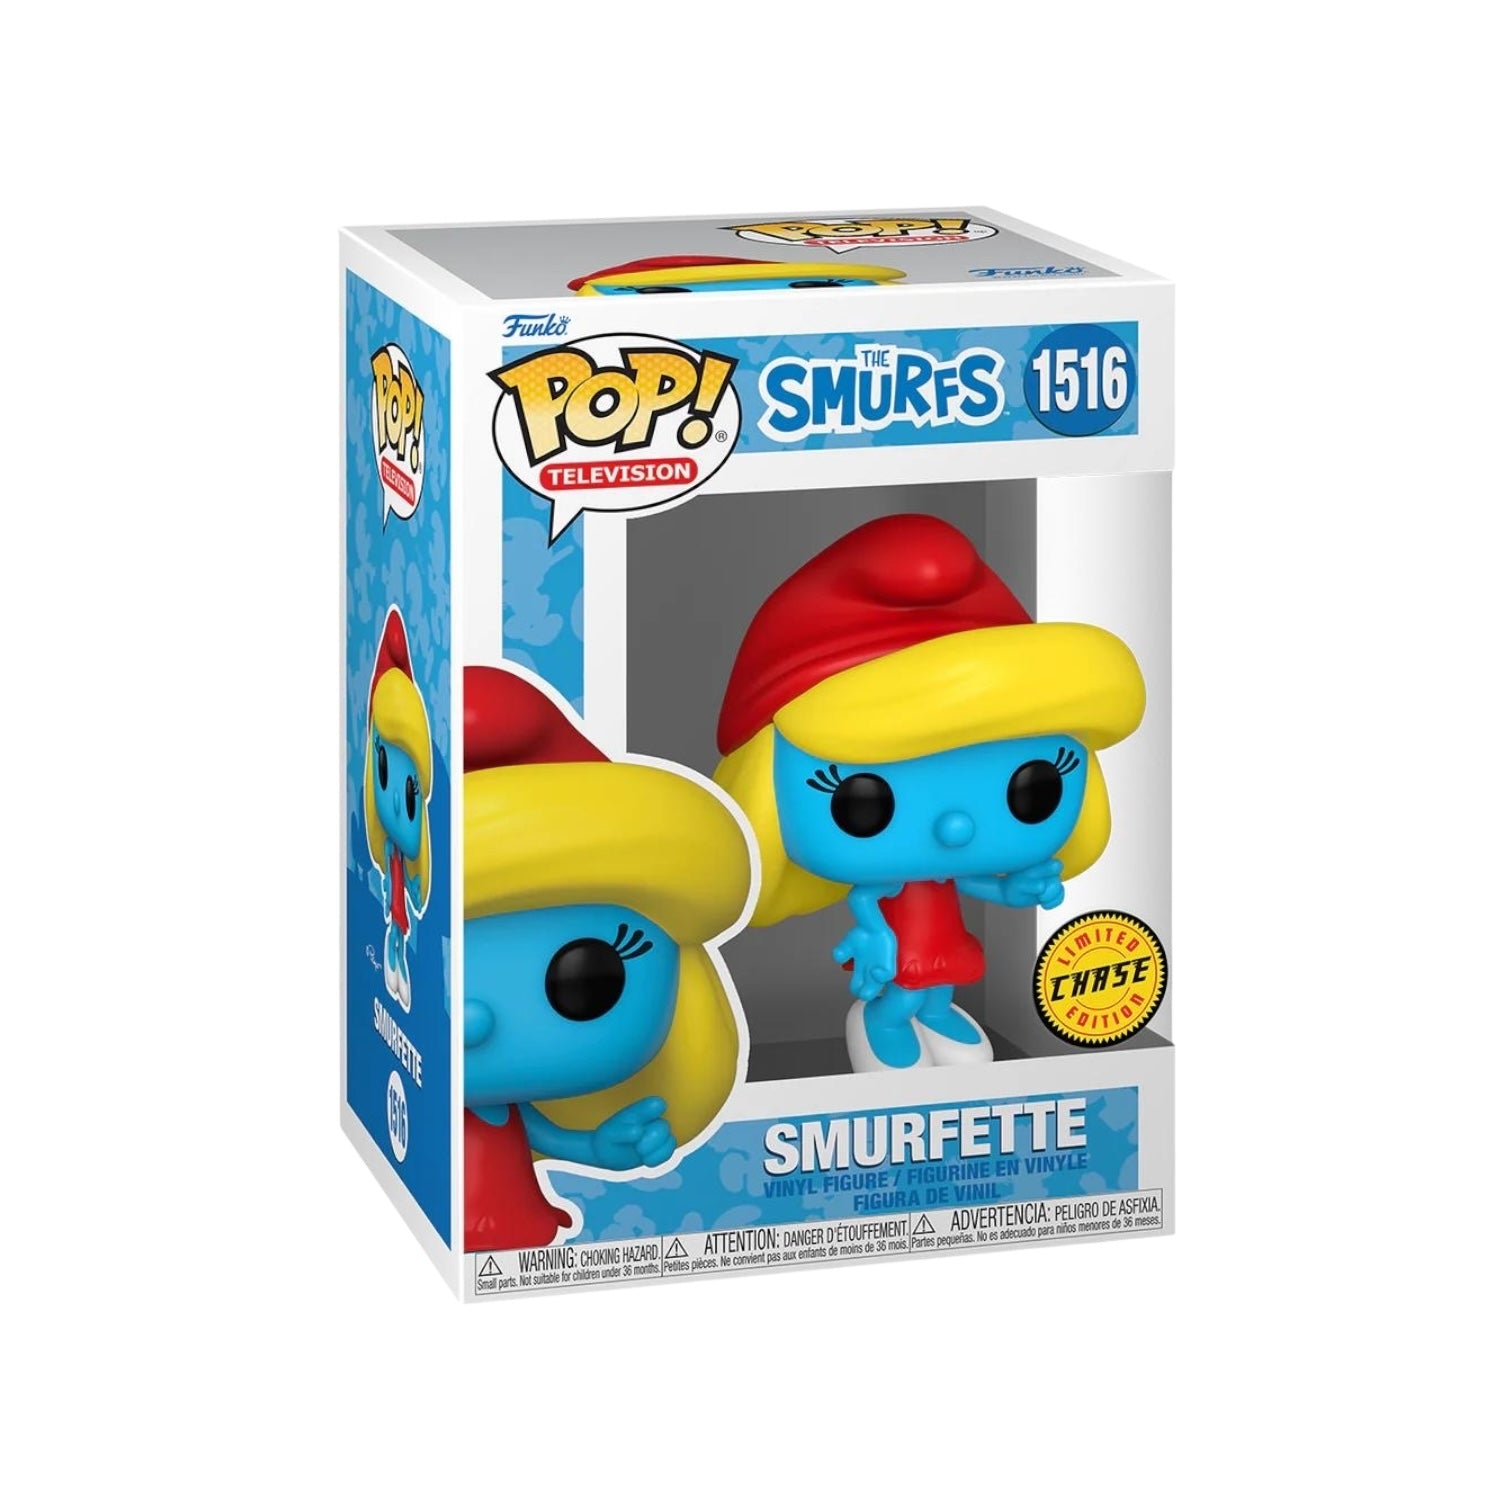 Smurfette #1516 Funko Pop!  - The Smurfs - Chance of chase - PREORDER